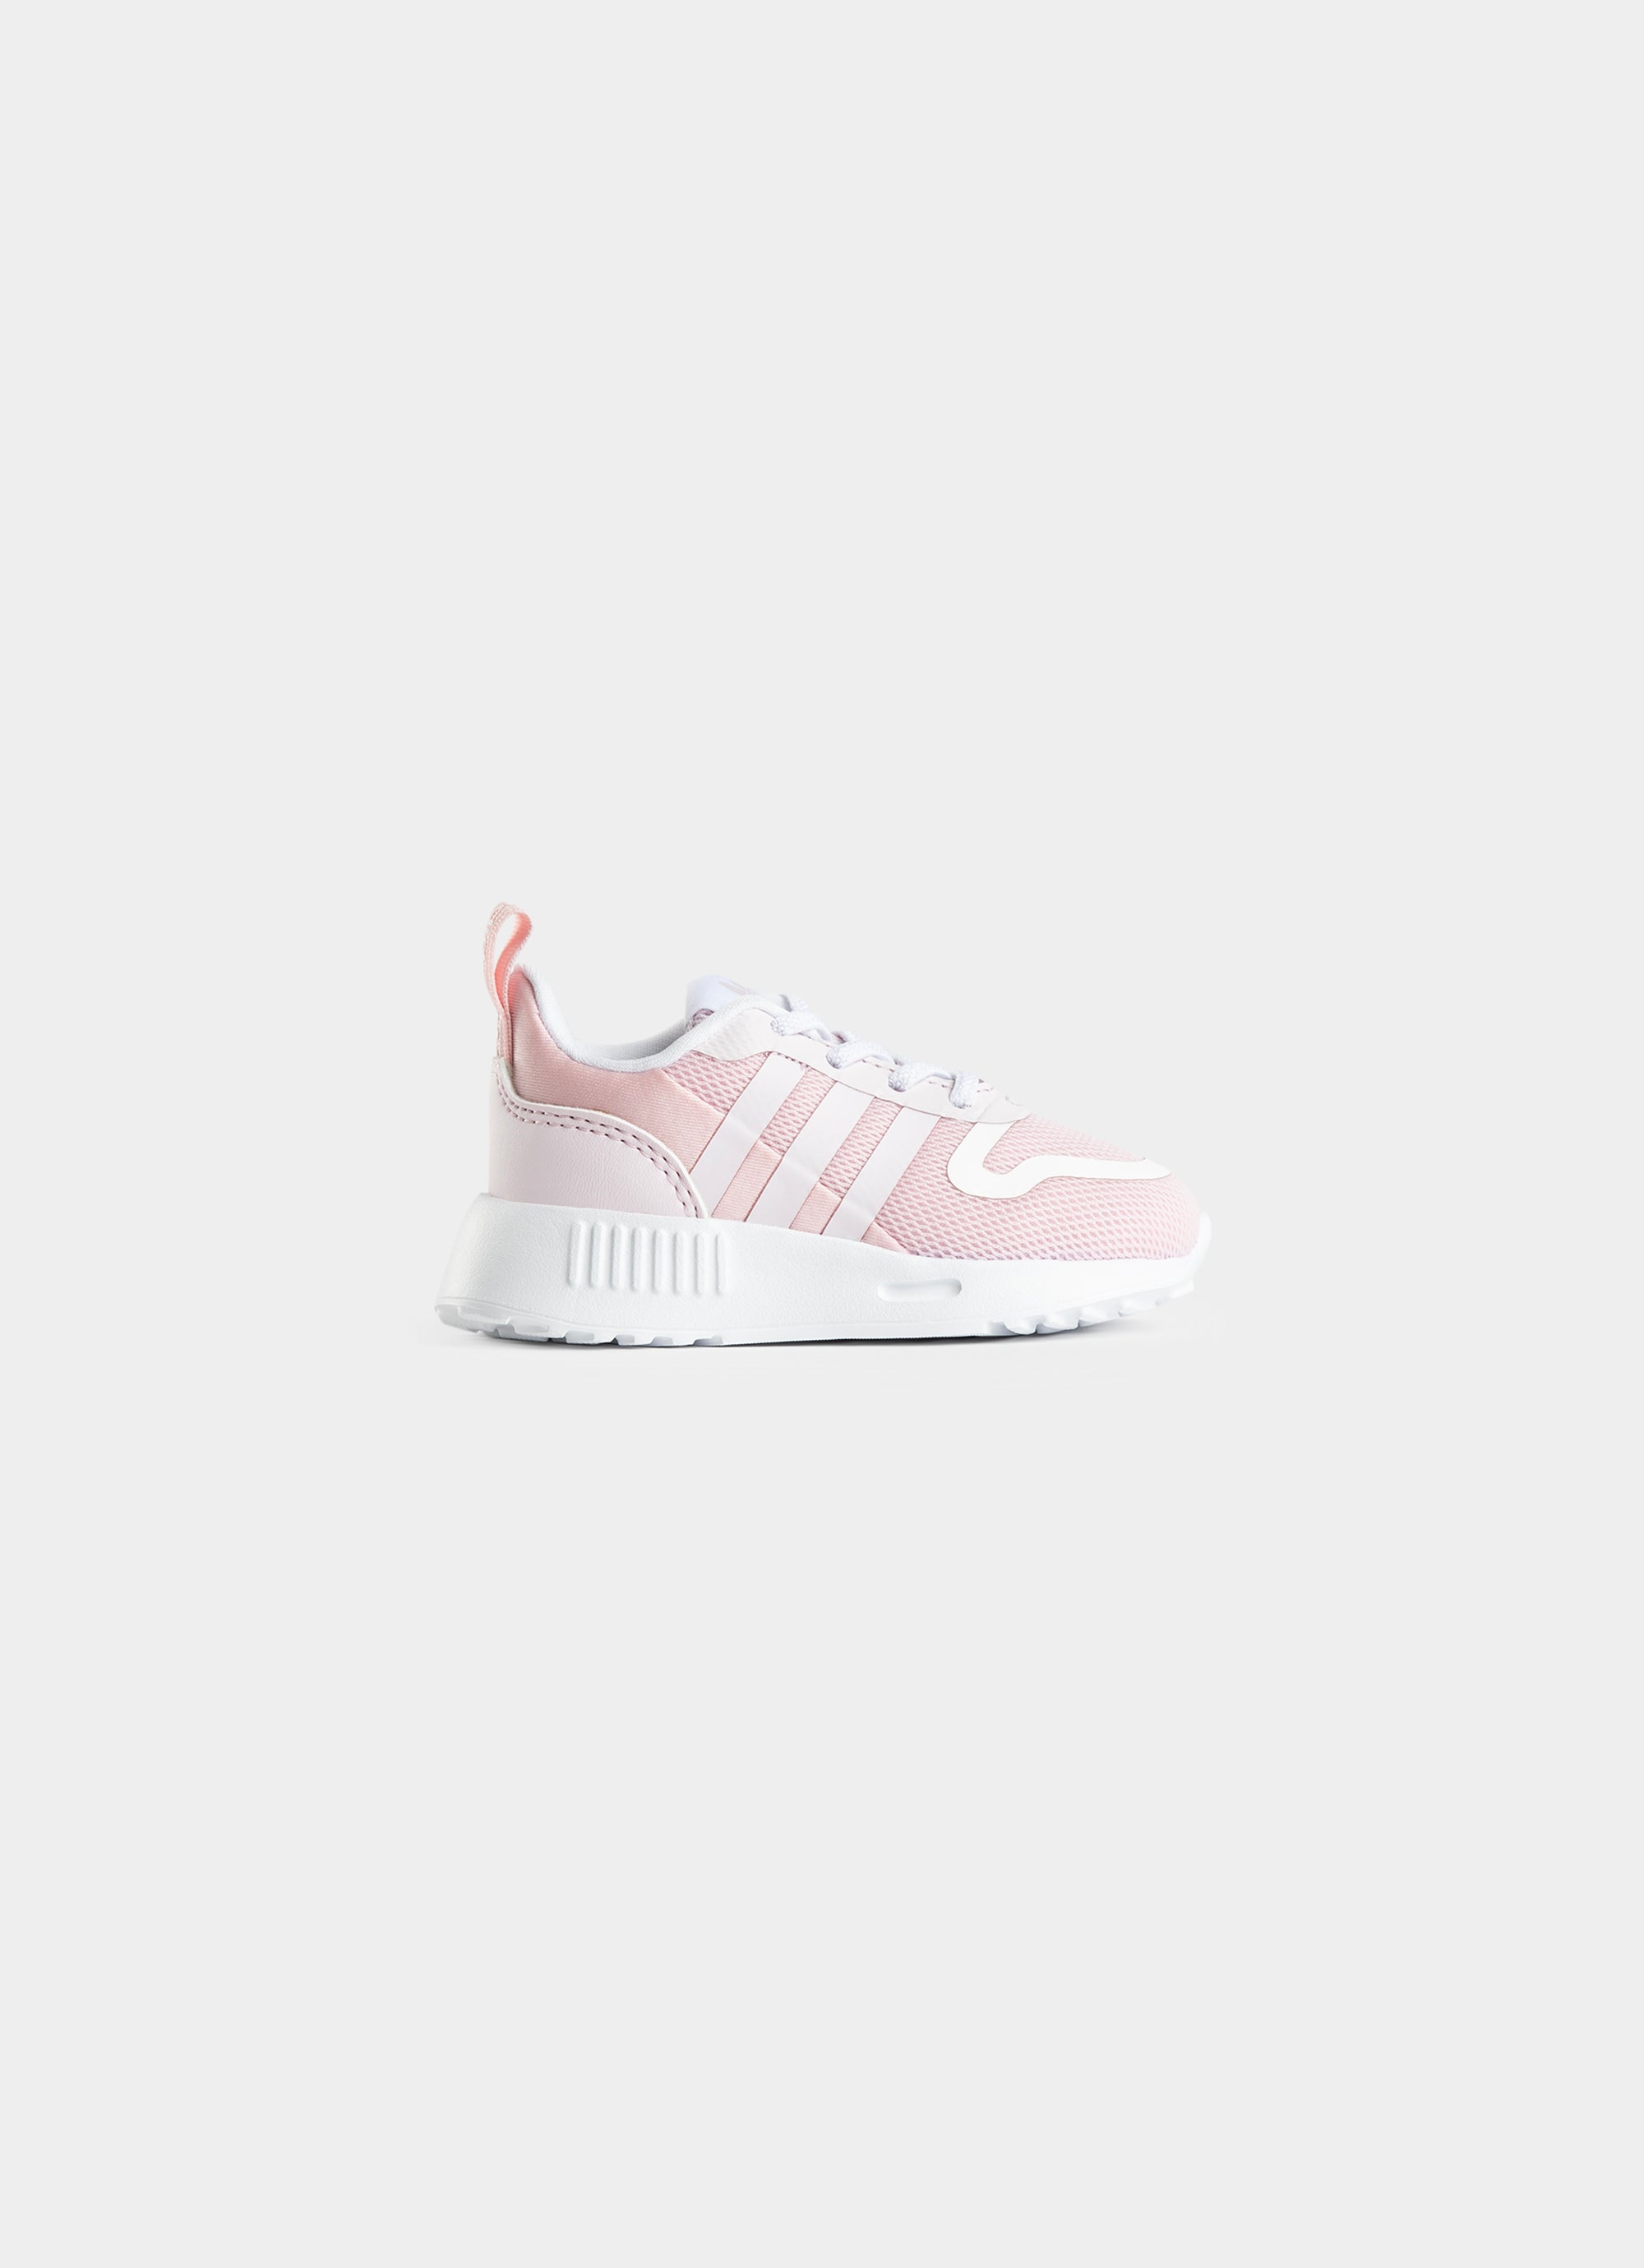 Red | - Shoes Multix Pink Rat Sportswear in Infant Adidas